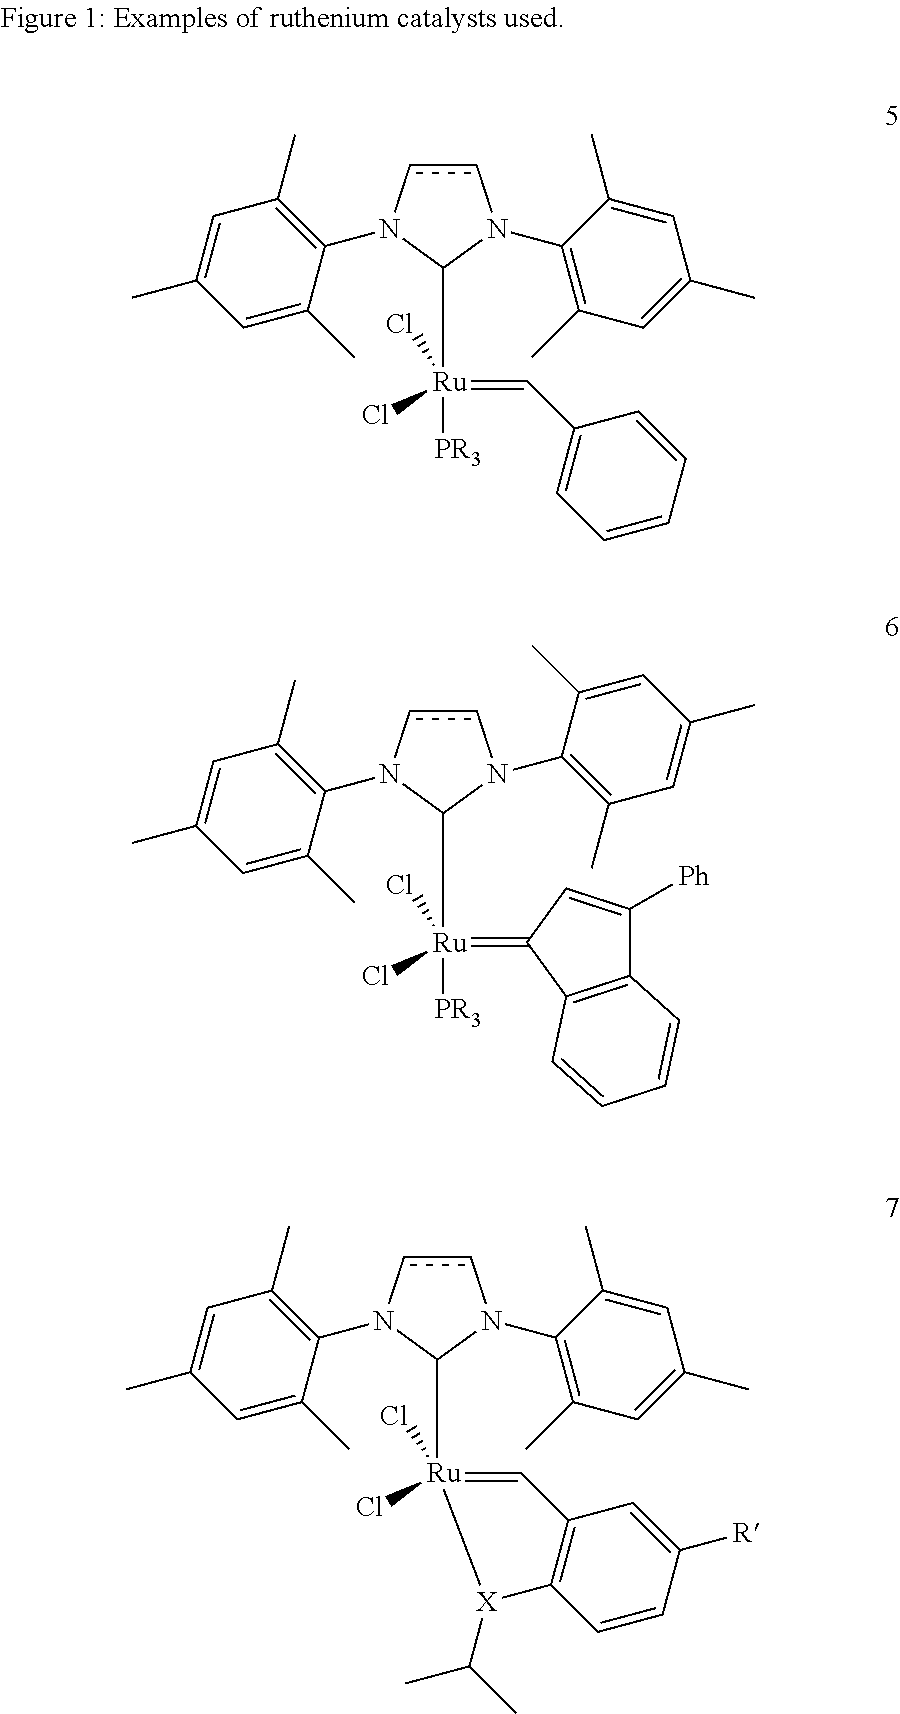 Method for producing dodeca-2,10-diene-1,12-dicarboxylic acid or 1,12-dodecane-dicarboxylic acid by way of ring-opening cross metathesis (ROCM) of cyclooctene with acrylic acid